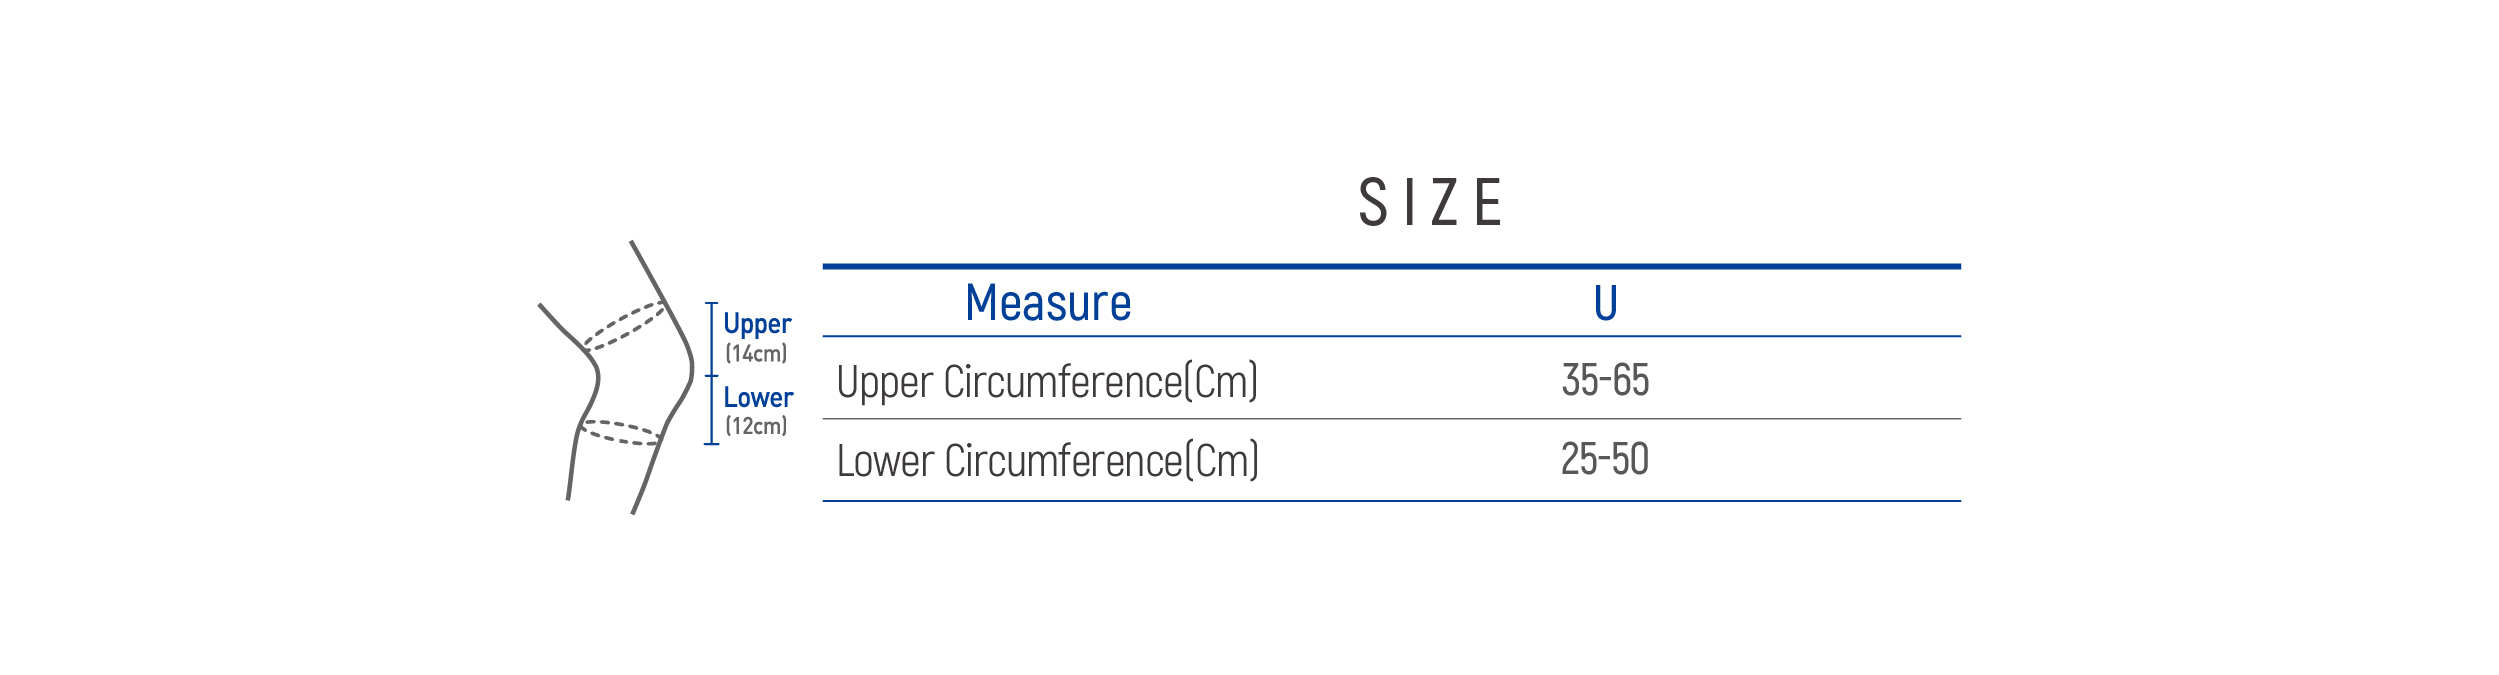 DR-K142 Size table image